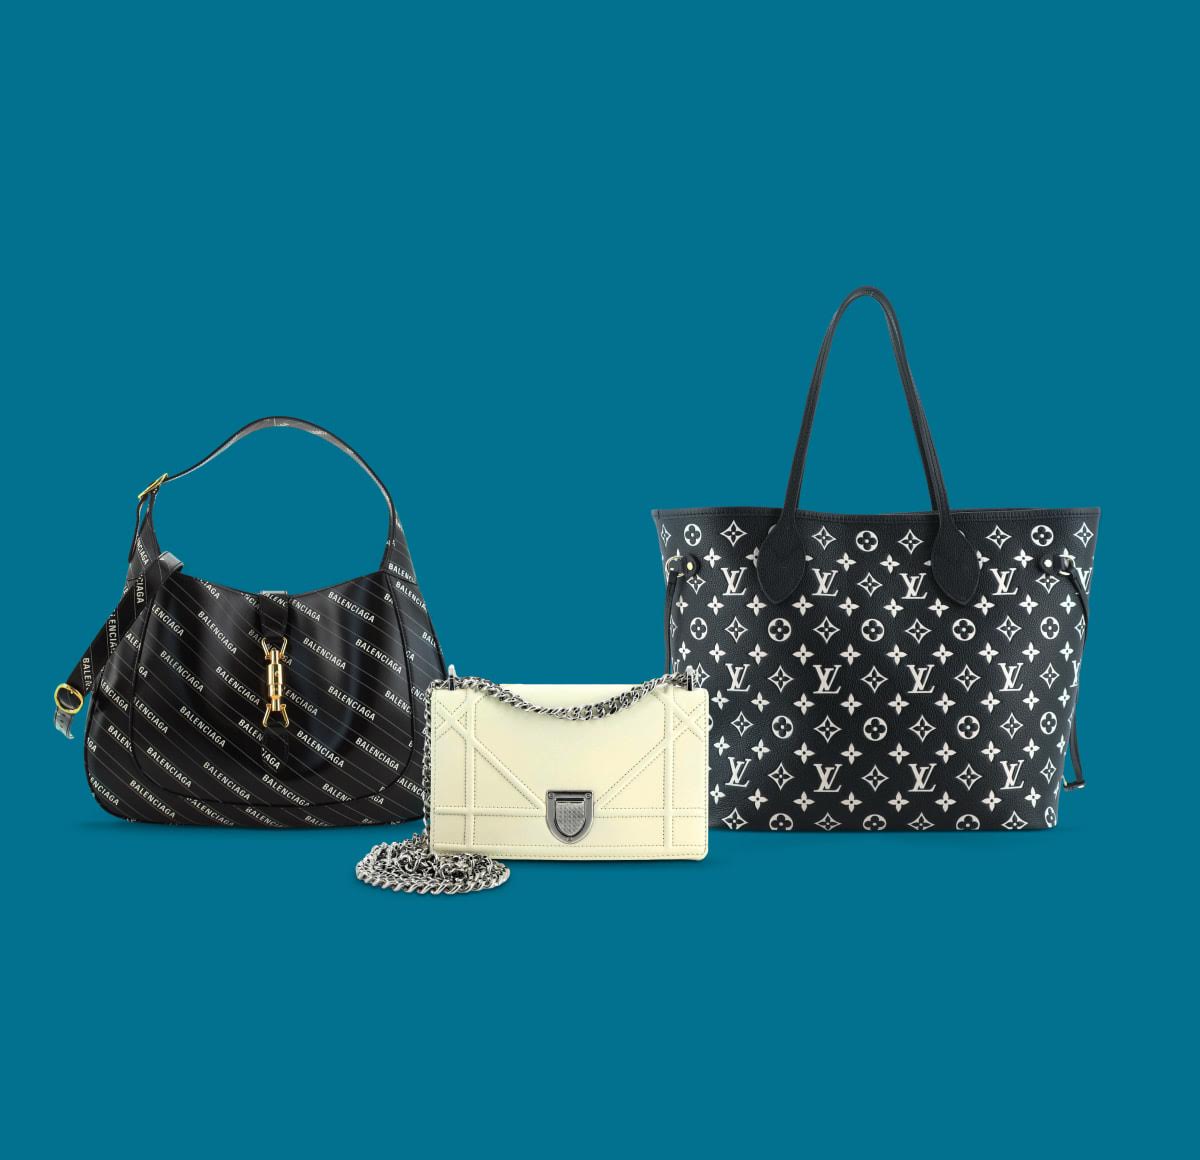 Grab Classic And Timeless Louis Vuitton Items At Up To 20% Off